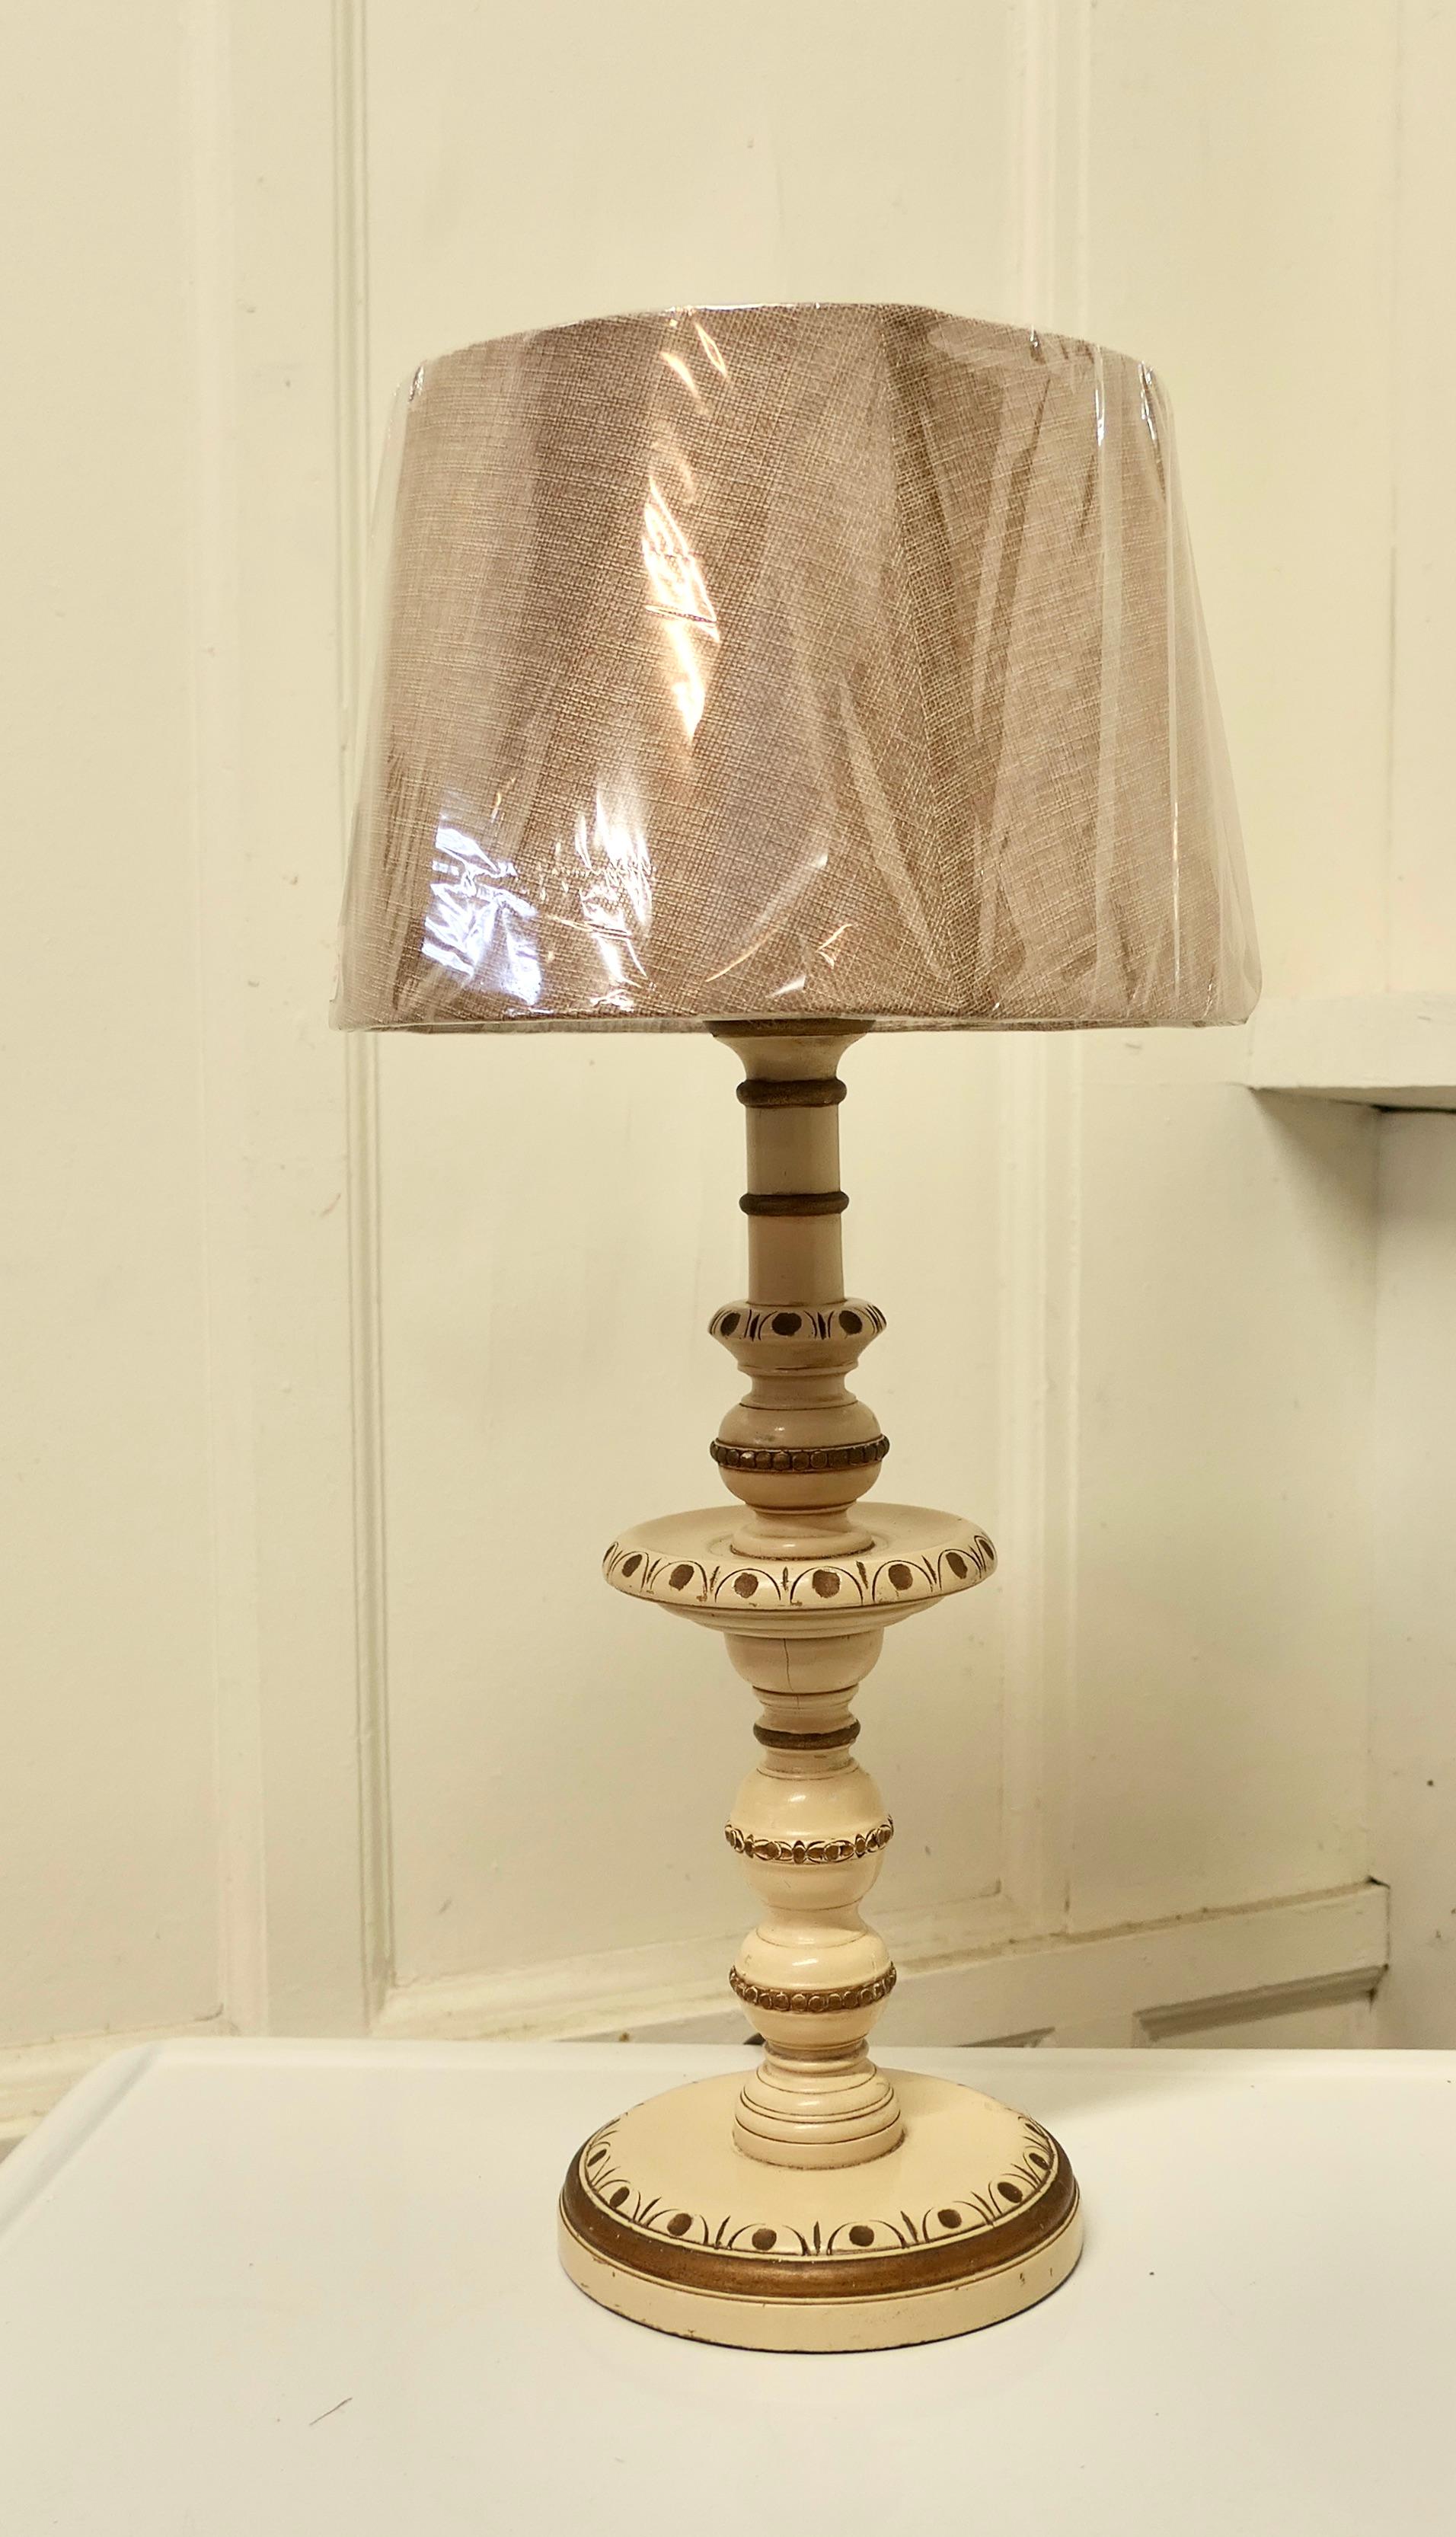 Folk Art Style carved and painted table lamp.

This lamp has a carved decoration painted in cream with gold highlights, the lamp comes with a new coarse linen lamp shade.
The lamp is 25” high with the shade which is 11” in diameter.
THM157.
 